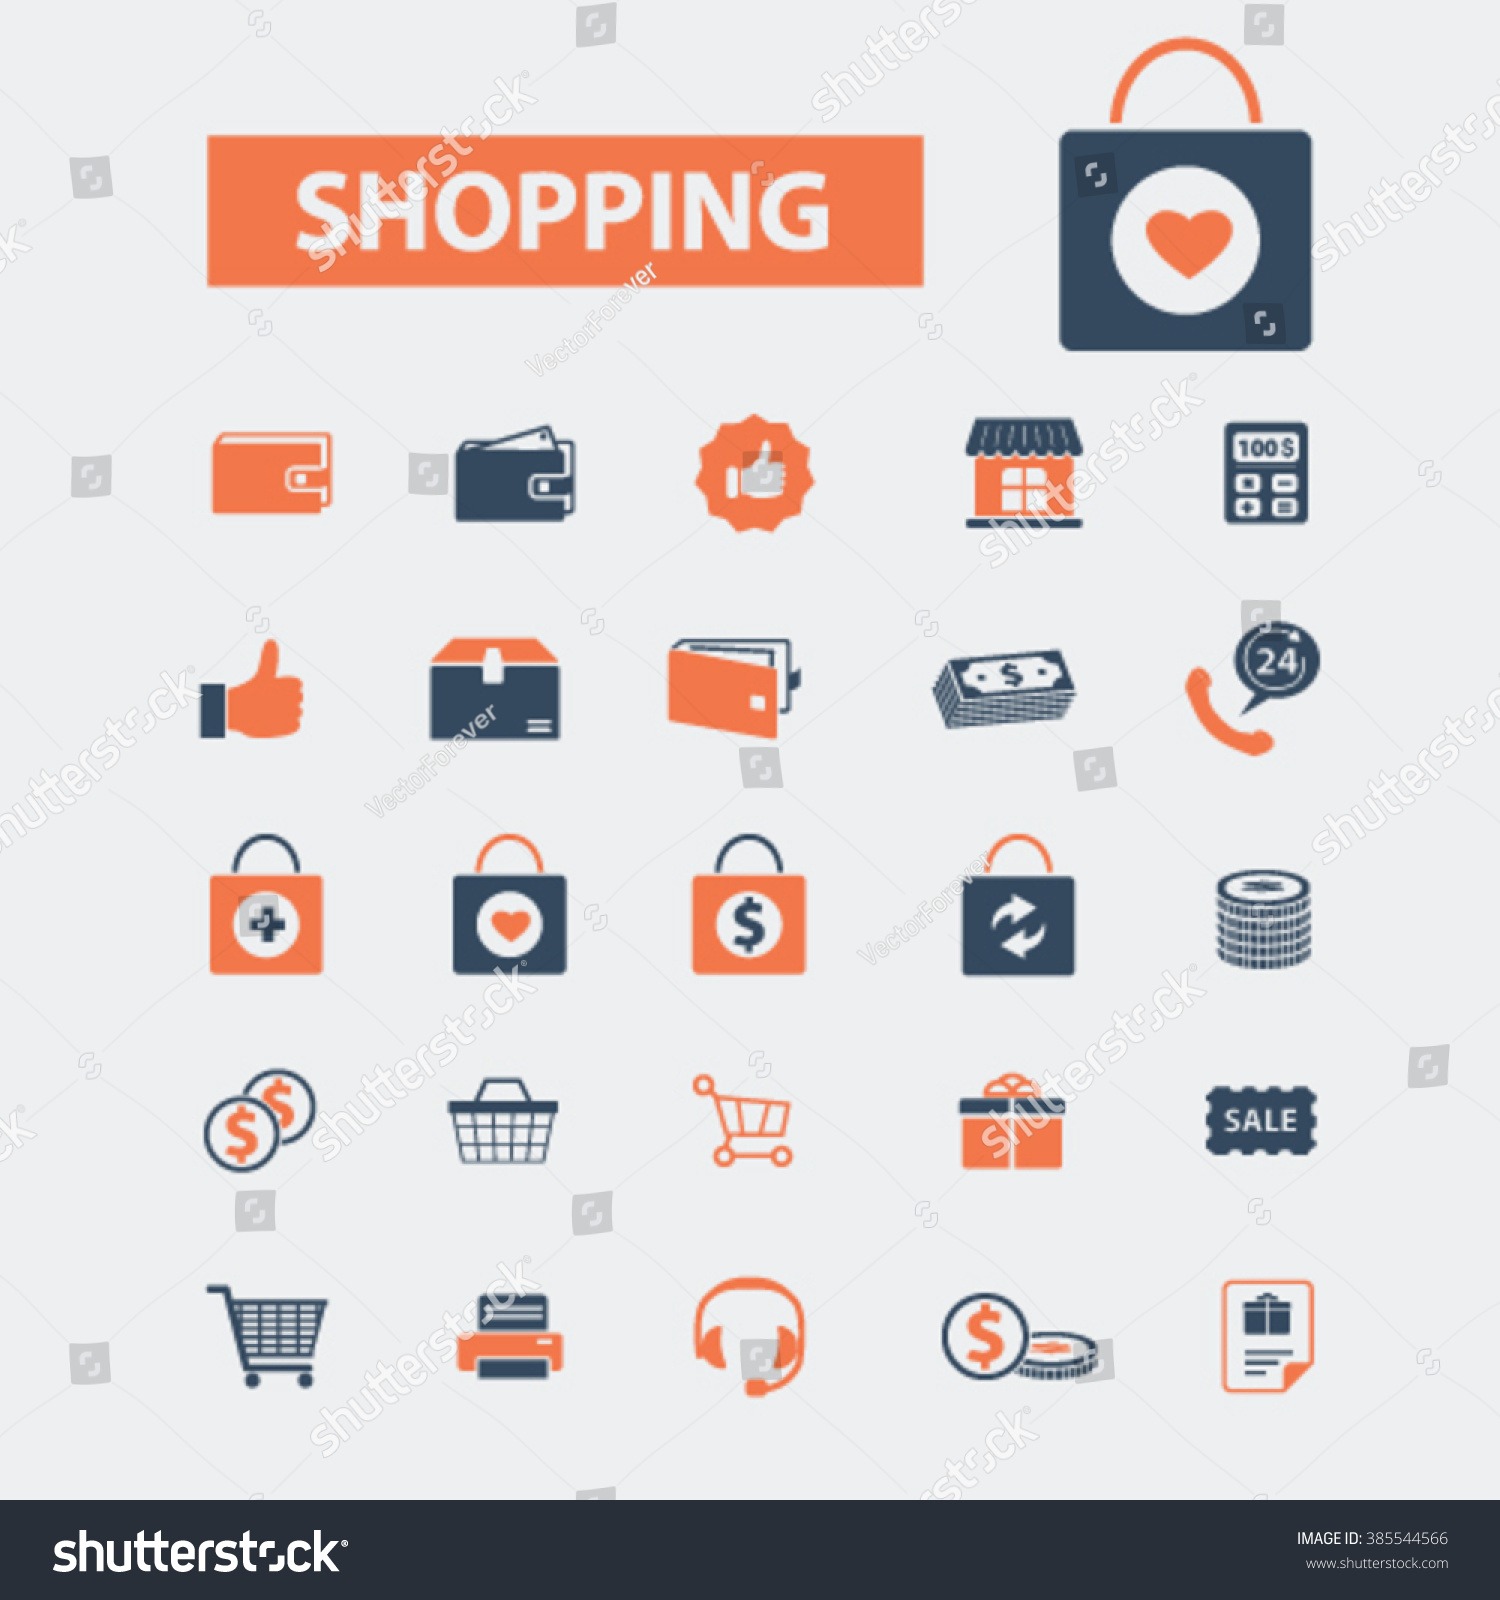 shopping, icons #385544566